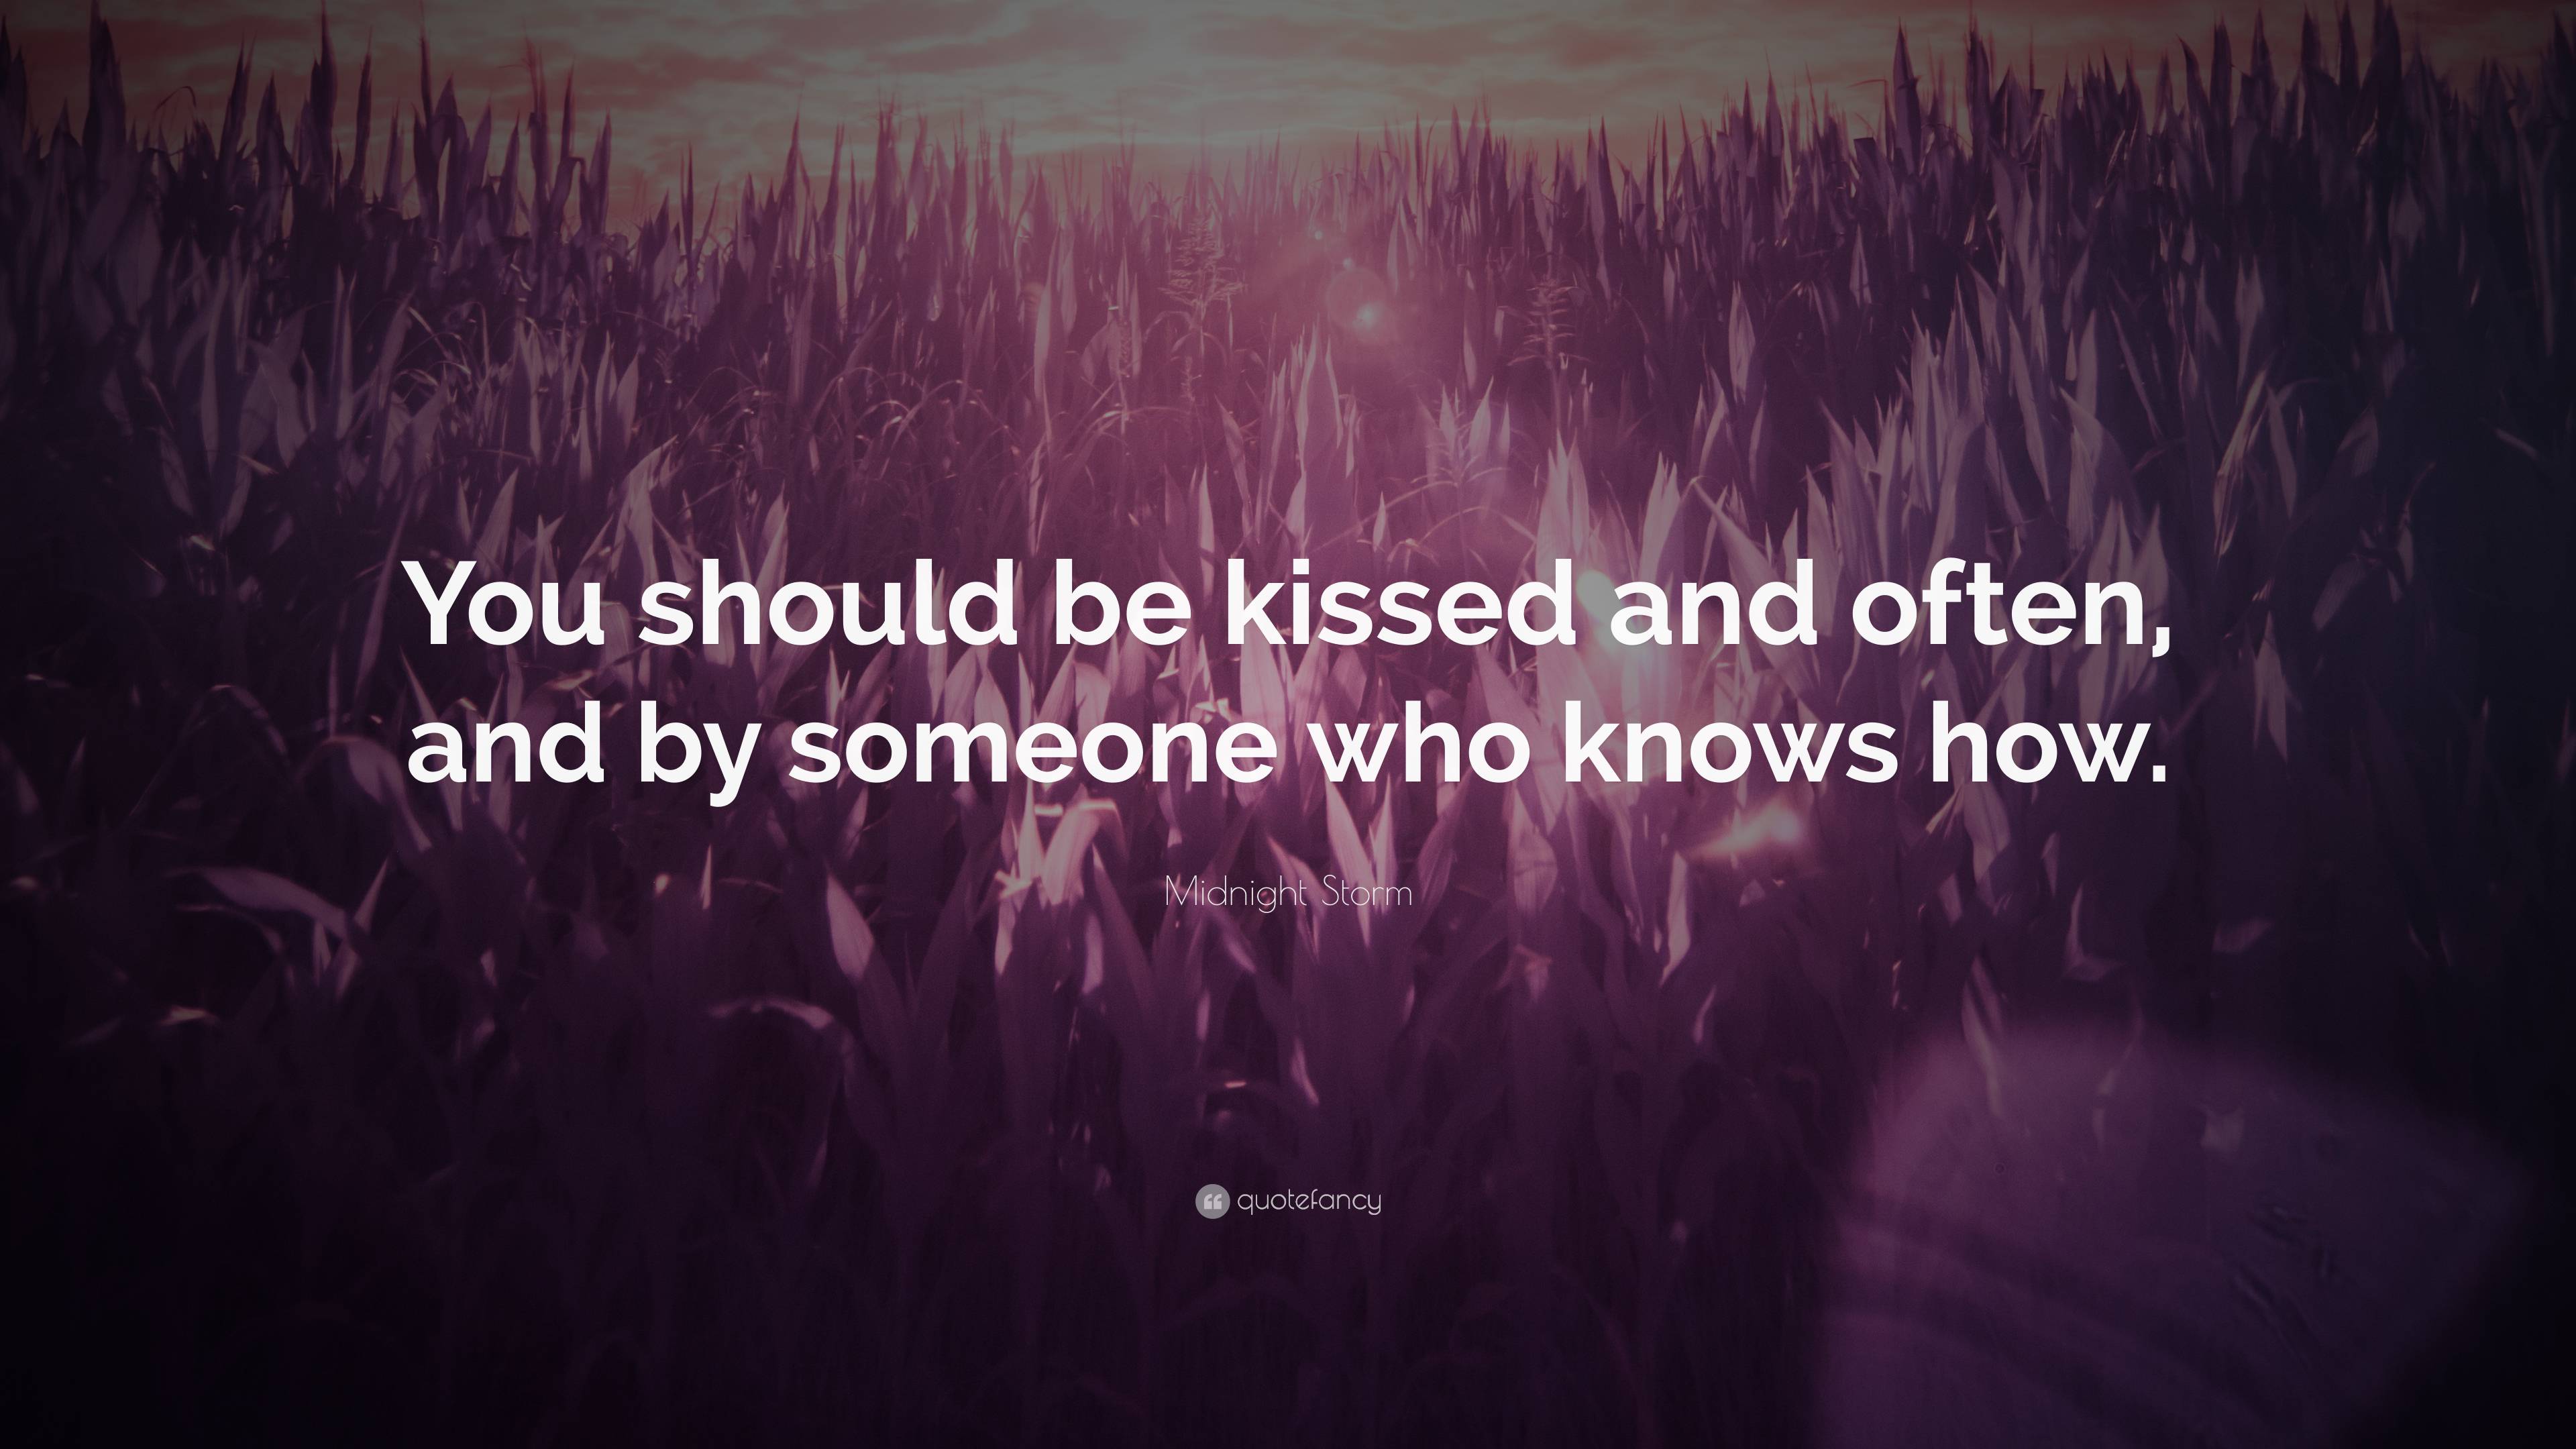 Midnight Storm Quote: “You should be kissed and often, and by someone ...